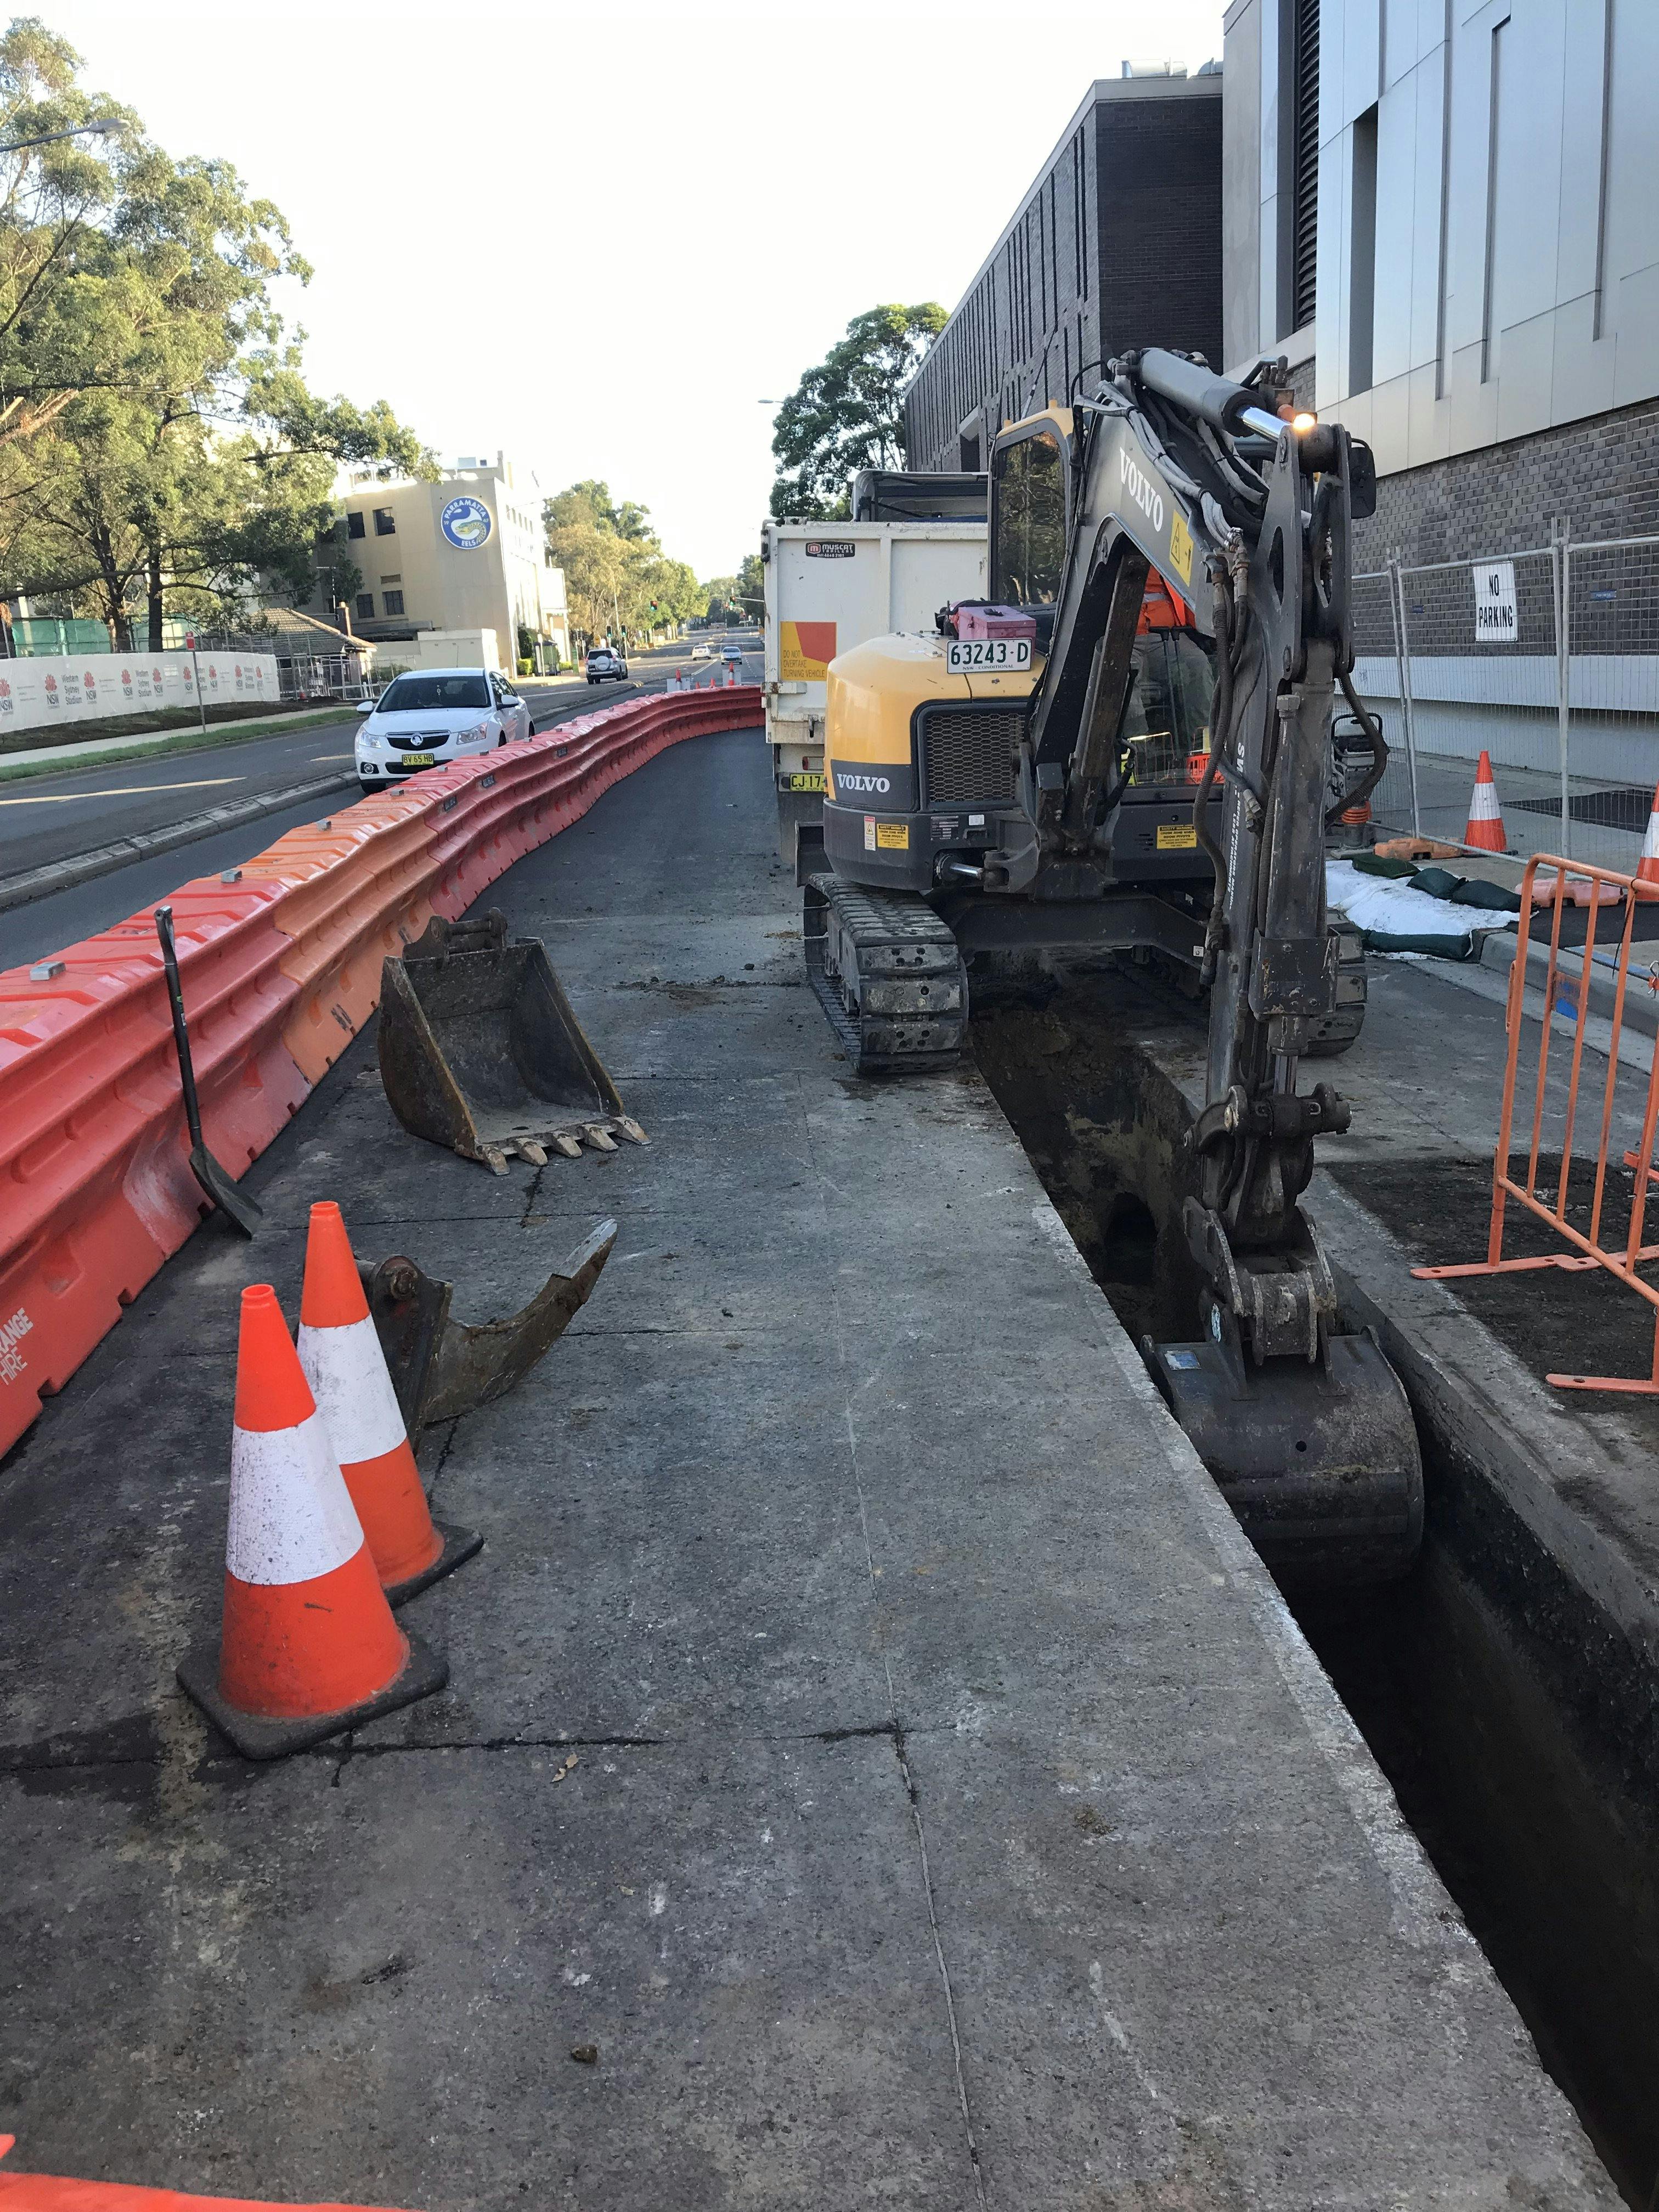 Parramatta Light Rail’s Enabling Works team have been busy with utilities work over the last month